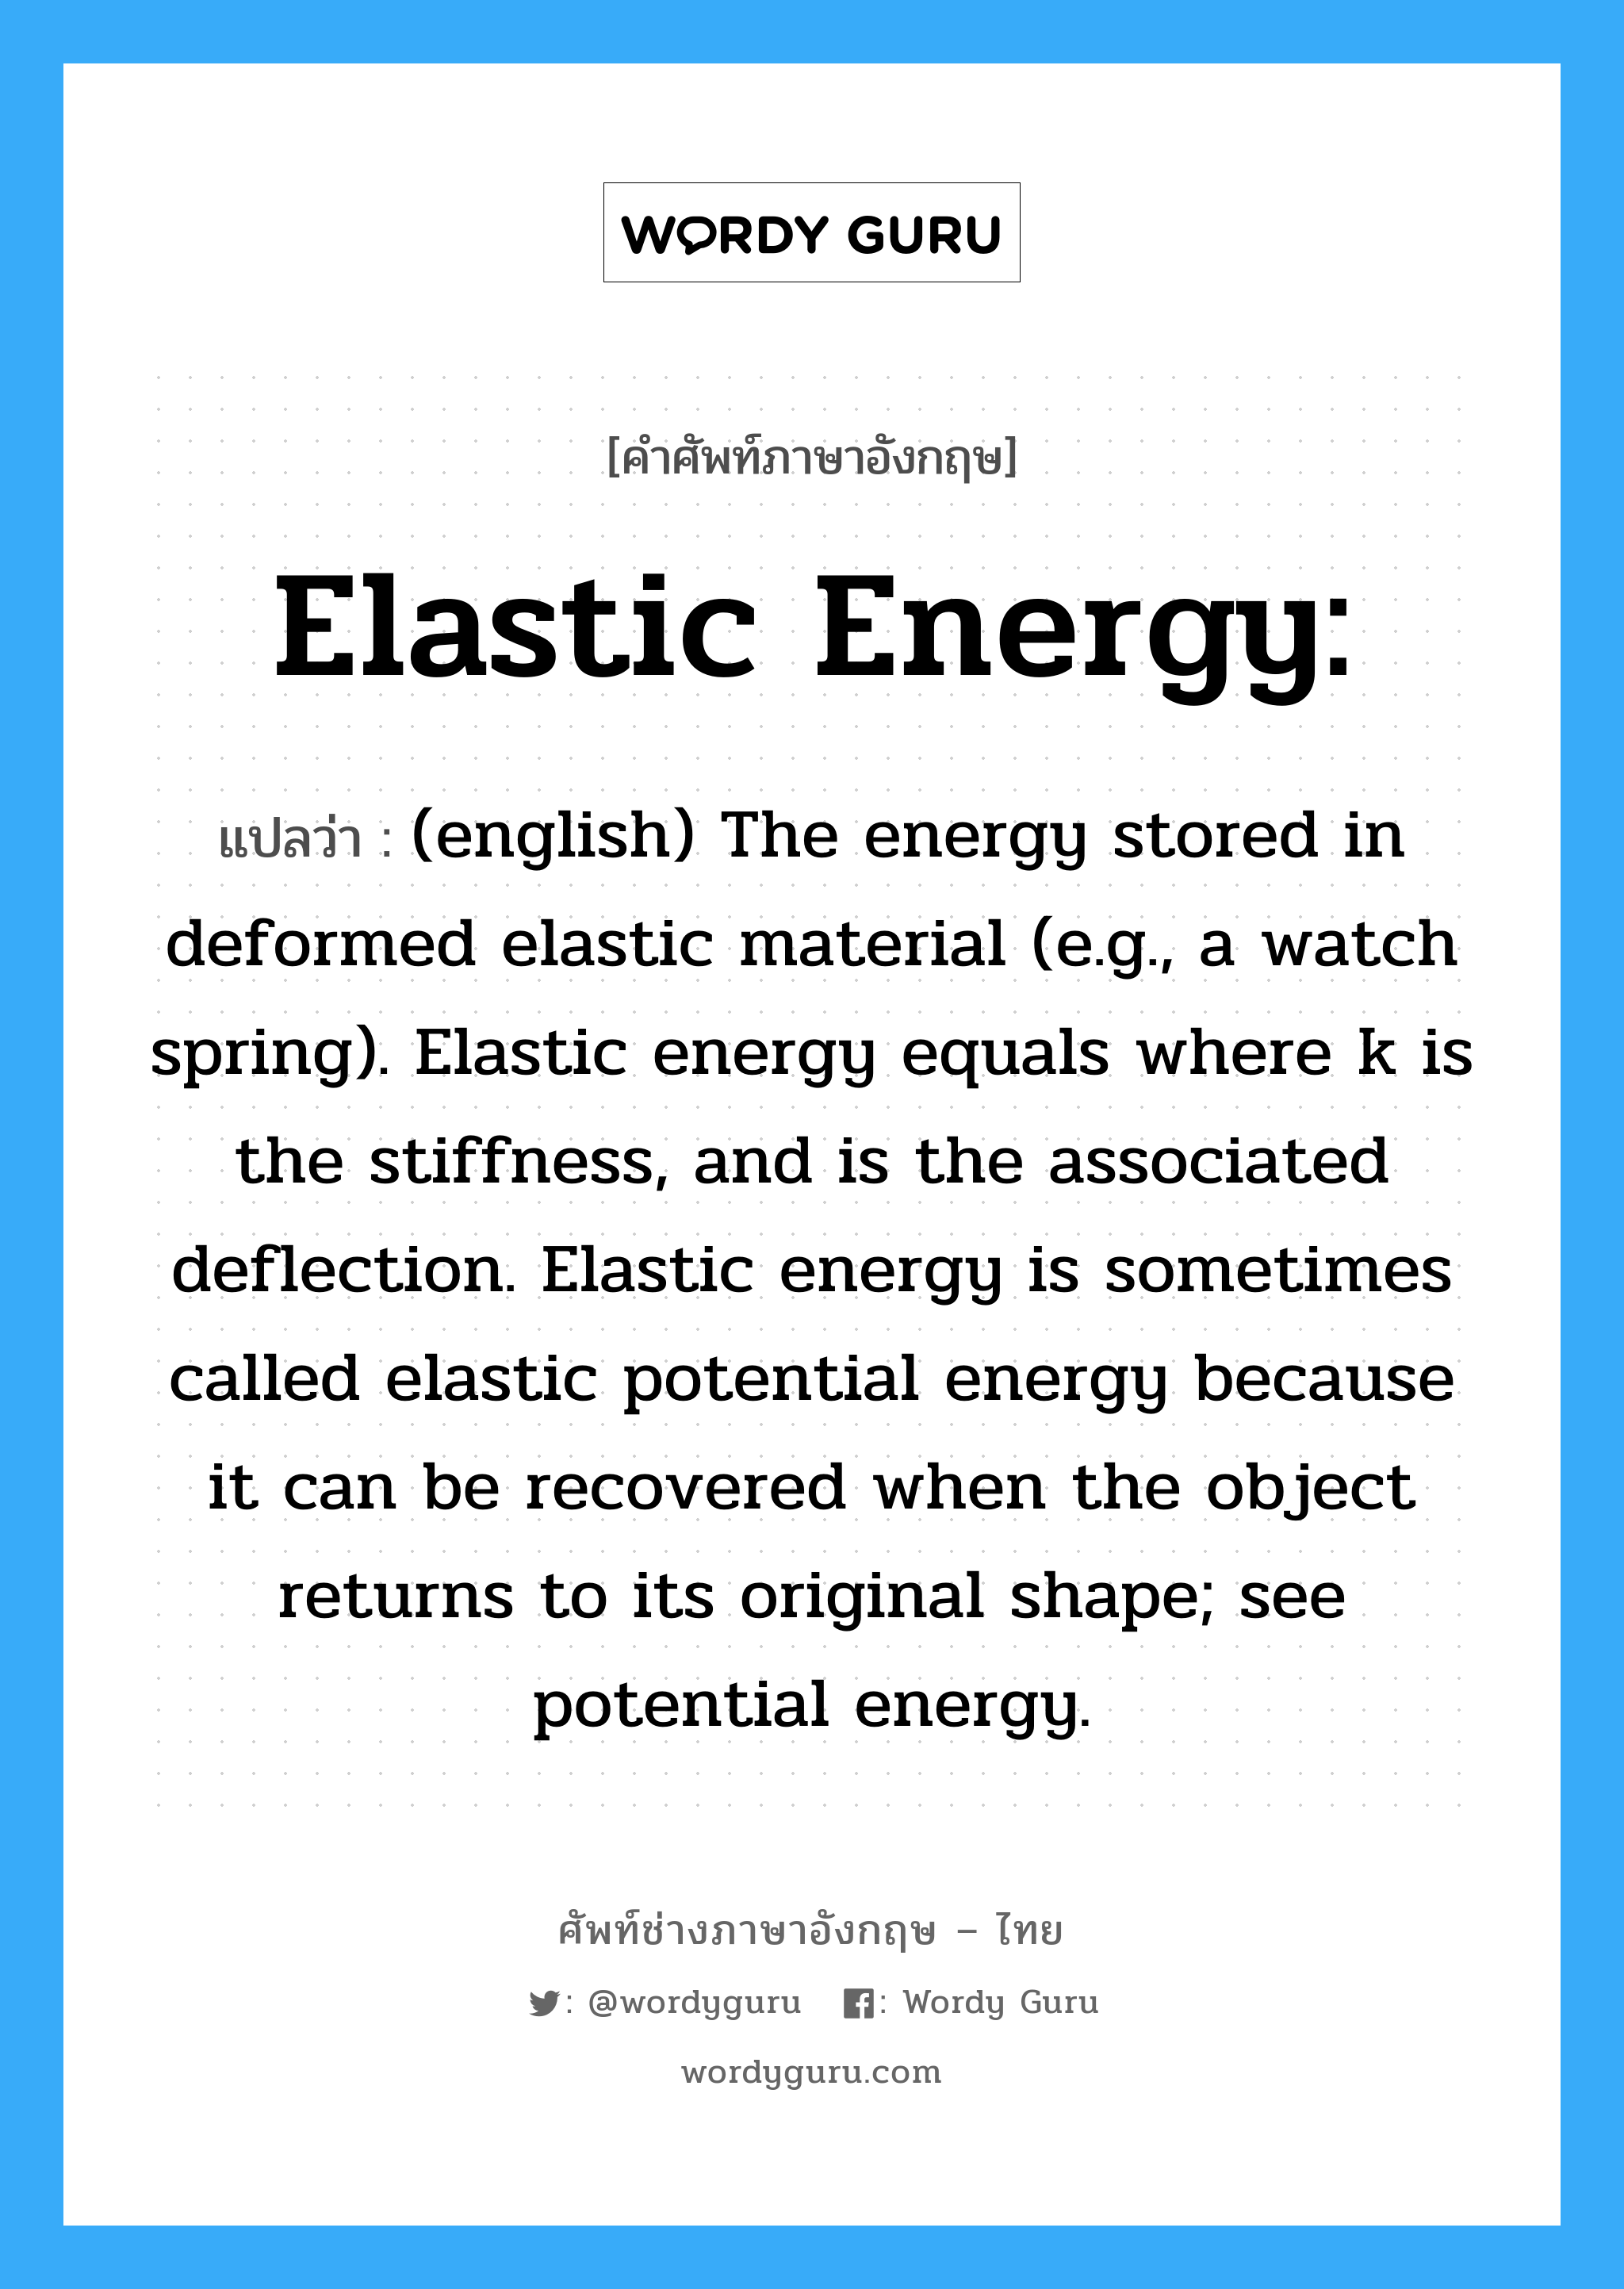 (english) The energy stored in deformed elastic material (e.g., a watch spring). Elastic energy equals where k is the stiffness, and is the associated deflection. Elastic energy is sometimes called elastic potential energy because it can be recovered when the object returns to its original shape; see potential energy. ภาษาอังกฤษ?, คำศัพท์ช่างภาษาอังกฤษ - ไทย (english) The energy stored in deformed elastic material (e.g., a watch spring). Elastic energy equals where k is the stiffness, and is the associated deflection. Elastic energy is sometimes called elastic potential energy because it can be recovered when the object returns to its original shape; see potential energy. คำศัพท์ภาษาอังกฤษ (english) The energy stored in deformed elastic material (e.g., a watch spring). Elastic energy equals where k is the stiffness, and is the associated deflection. Elastic energy is sometimes called elastic potential energy because it can be recovered when the object returns to its original shape; see potential energy. แปลว่า Elastic energy: